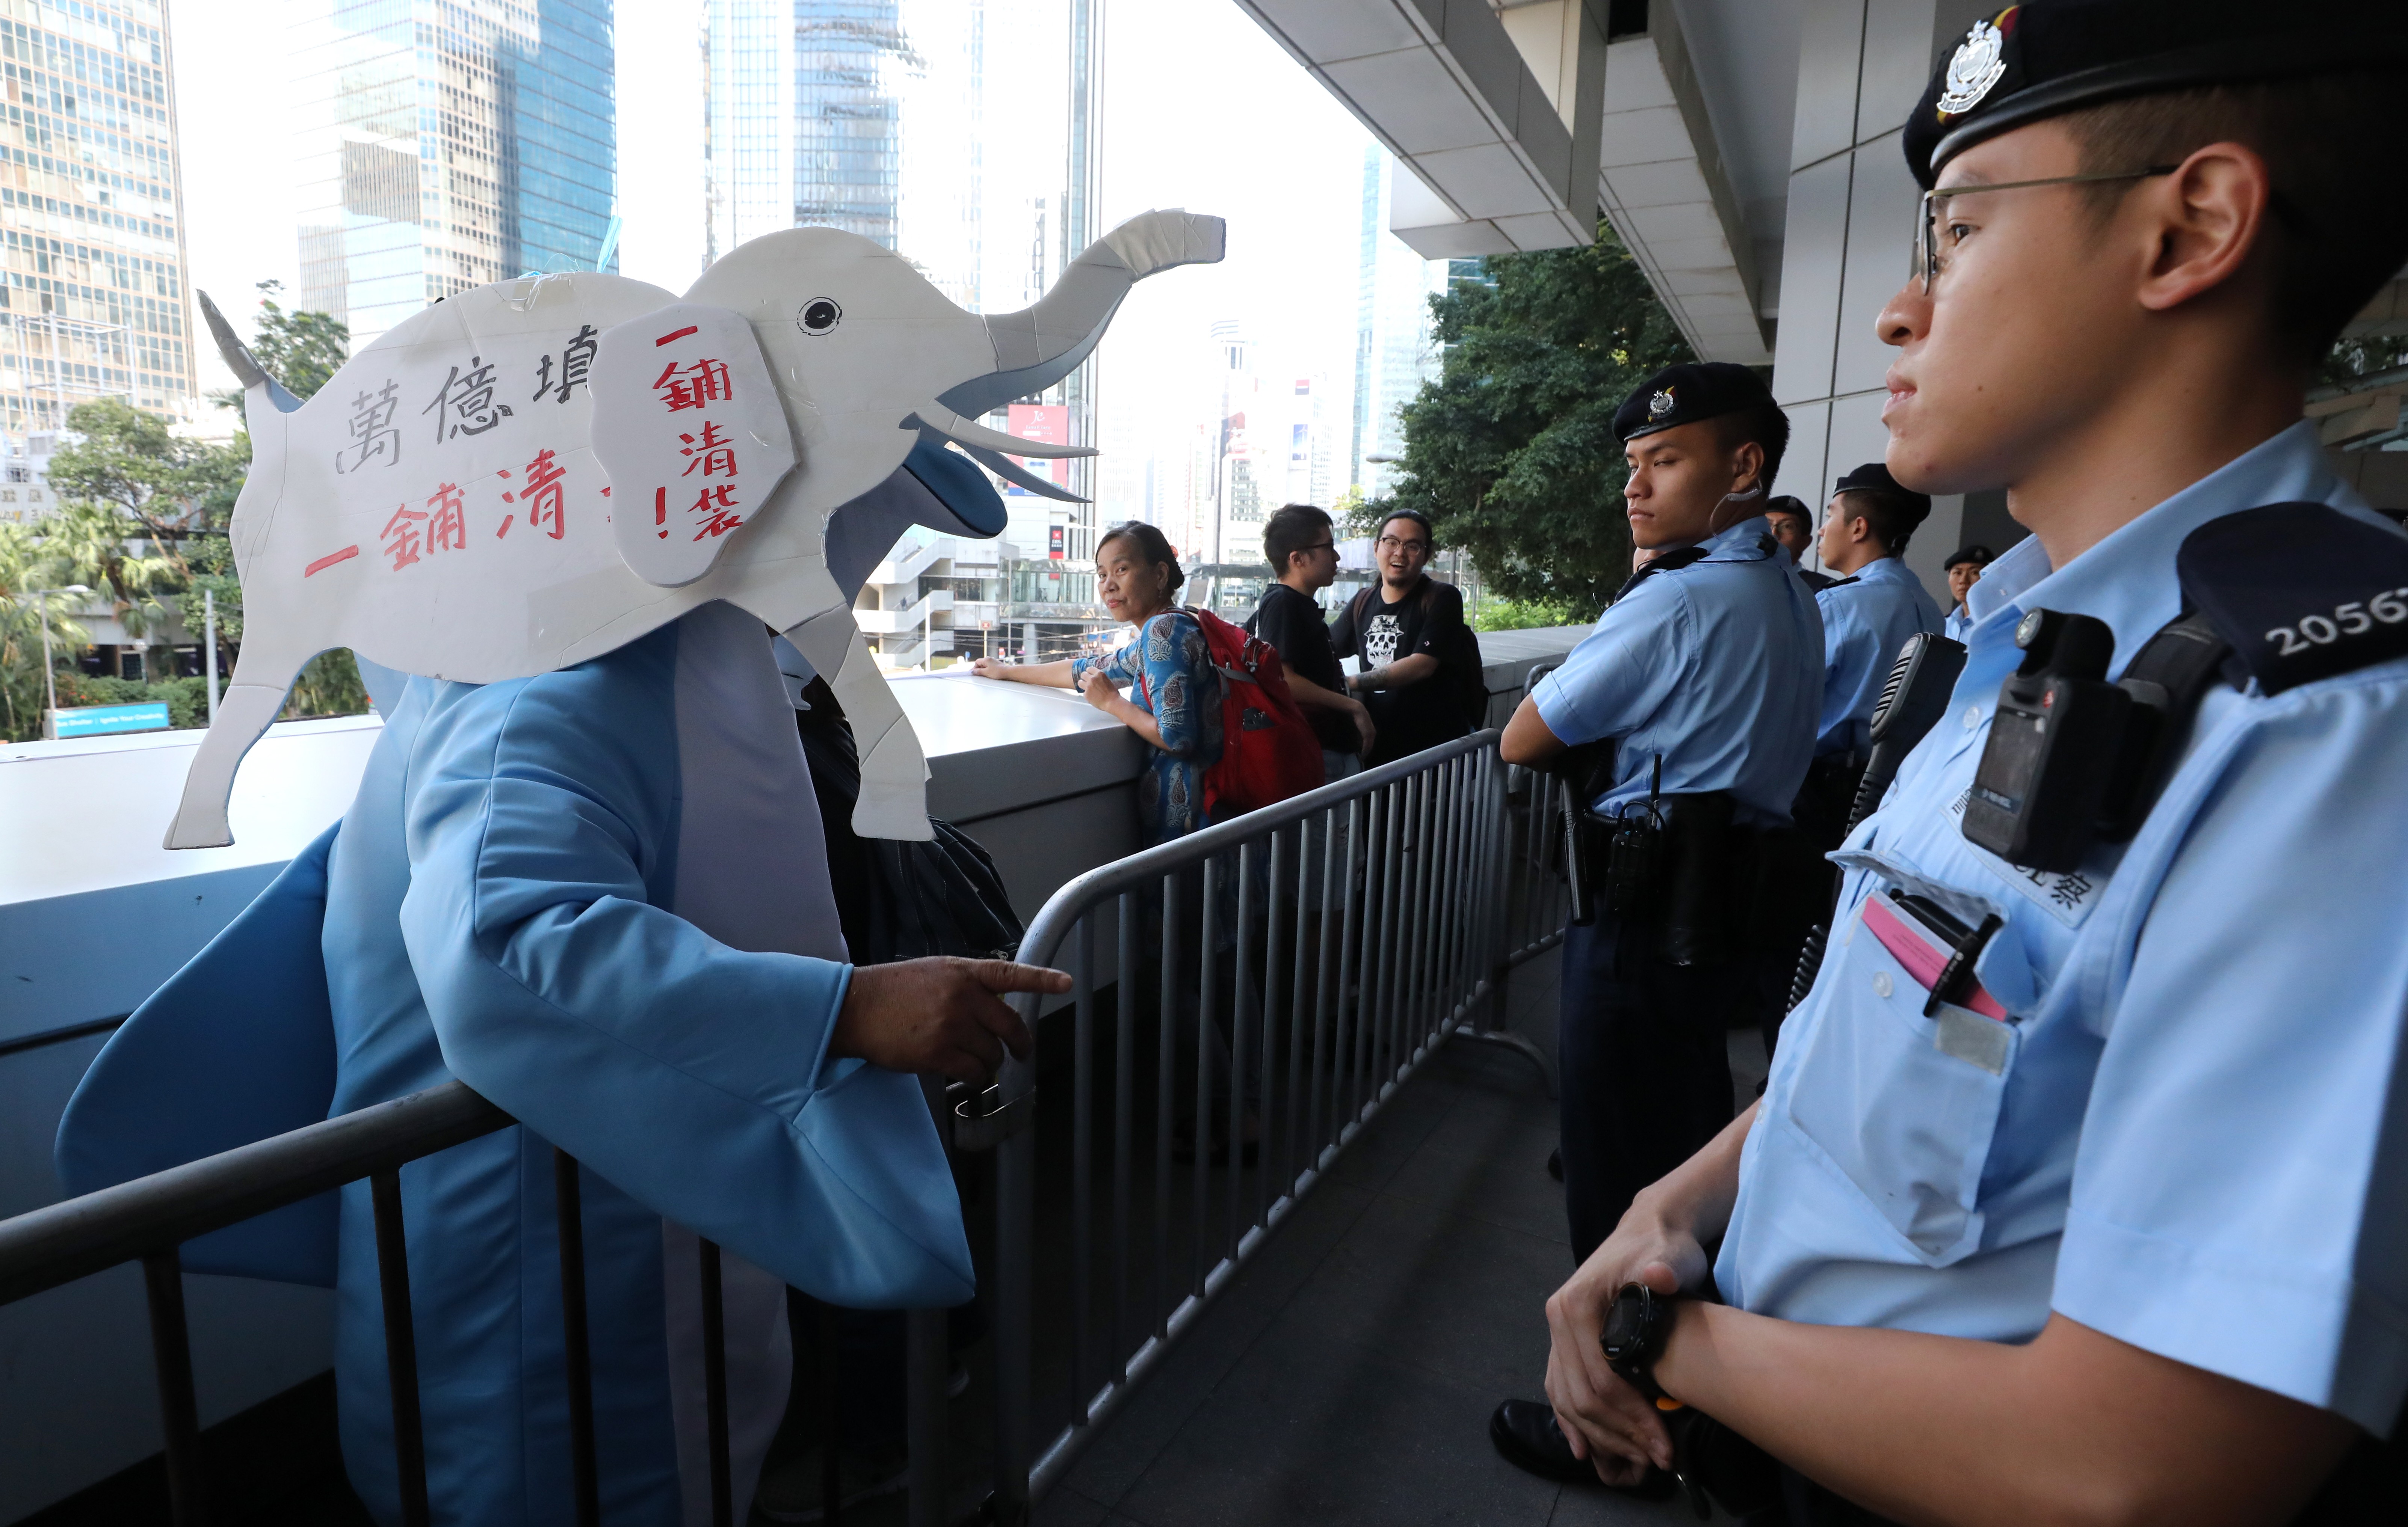 A protester dressed as a white elephant in protest against the Lantau Island reclamation scheme at government headquarters in Admiralty. Photo: Felix Wong